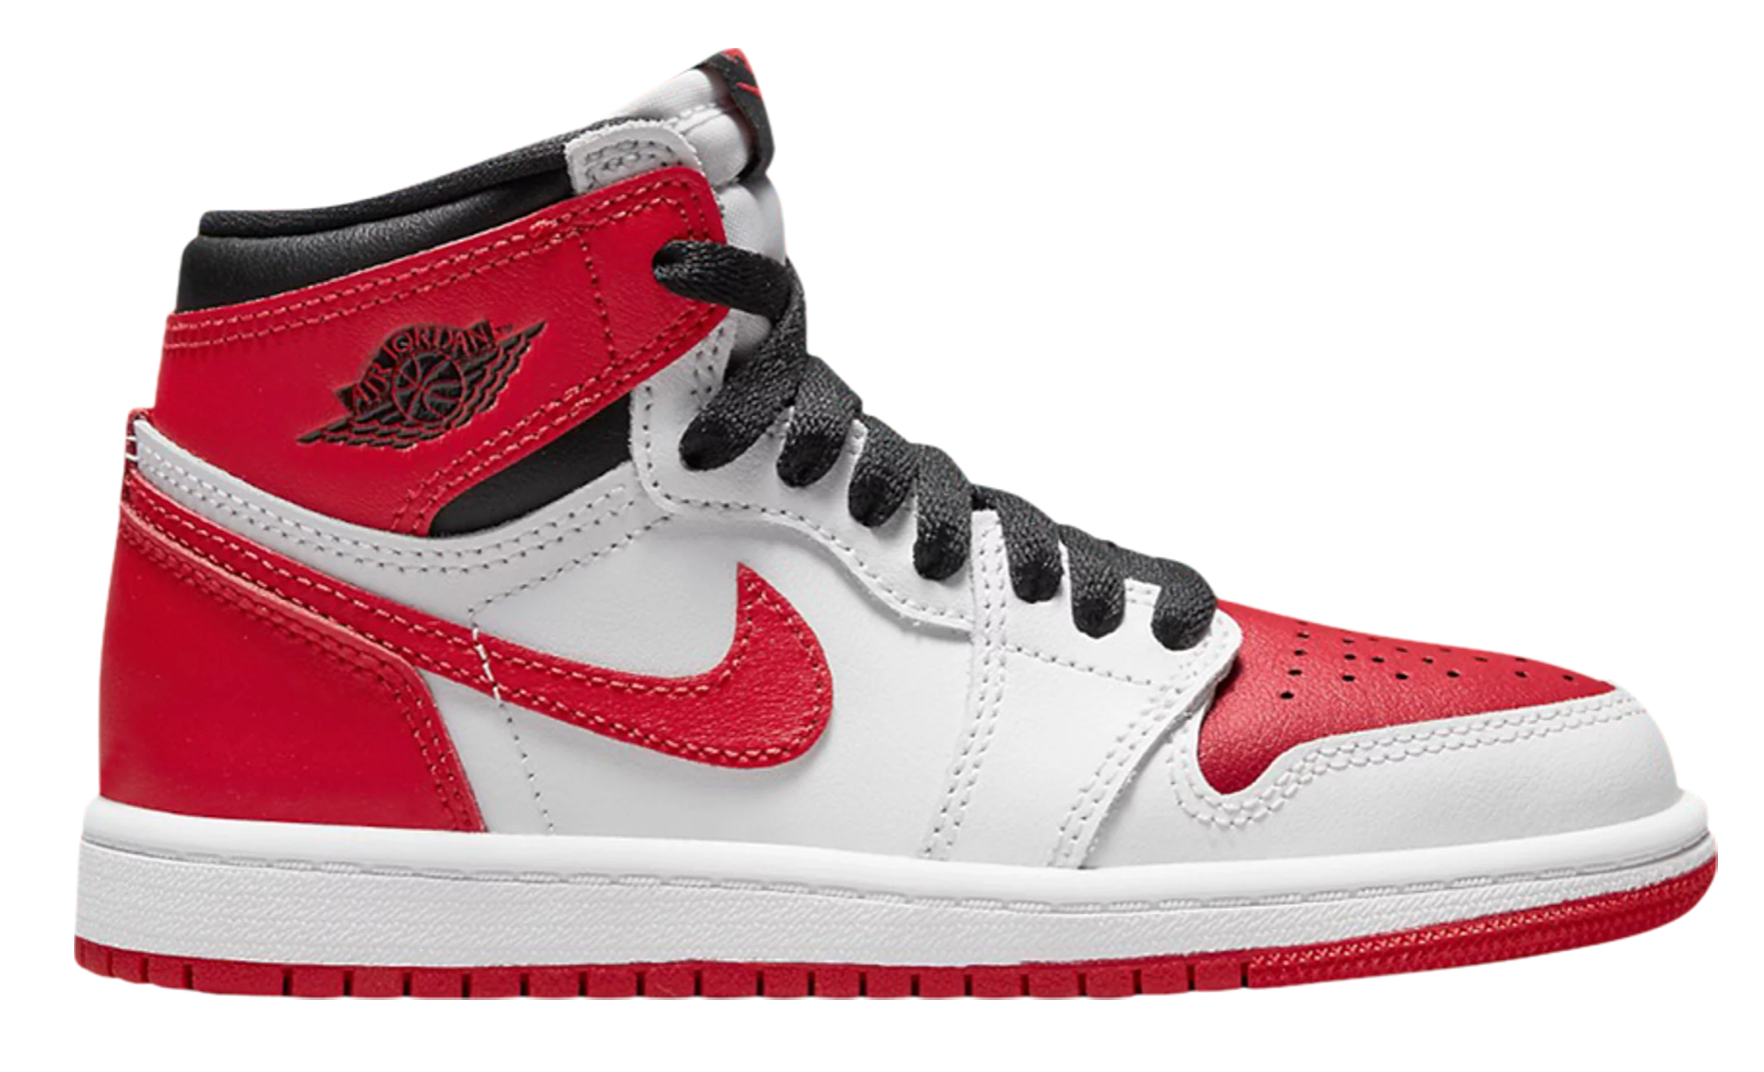 Jordan Red-White Brand will be decorating the